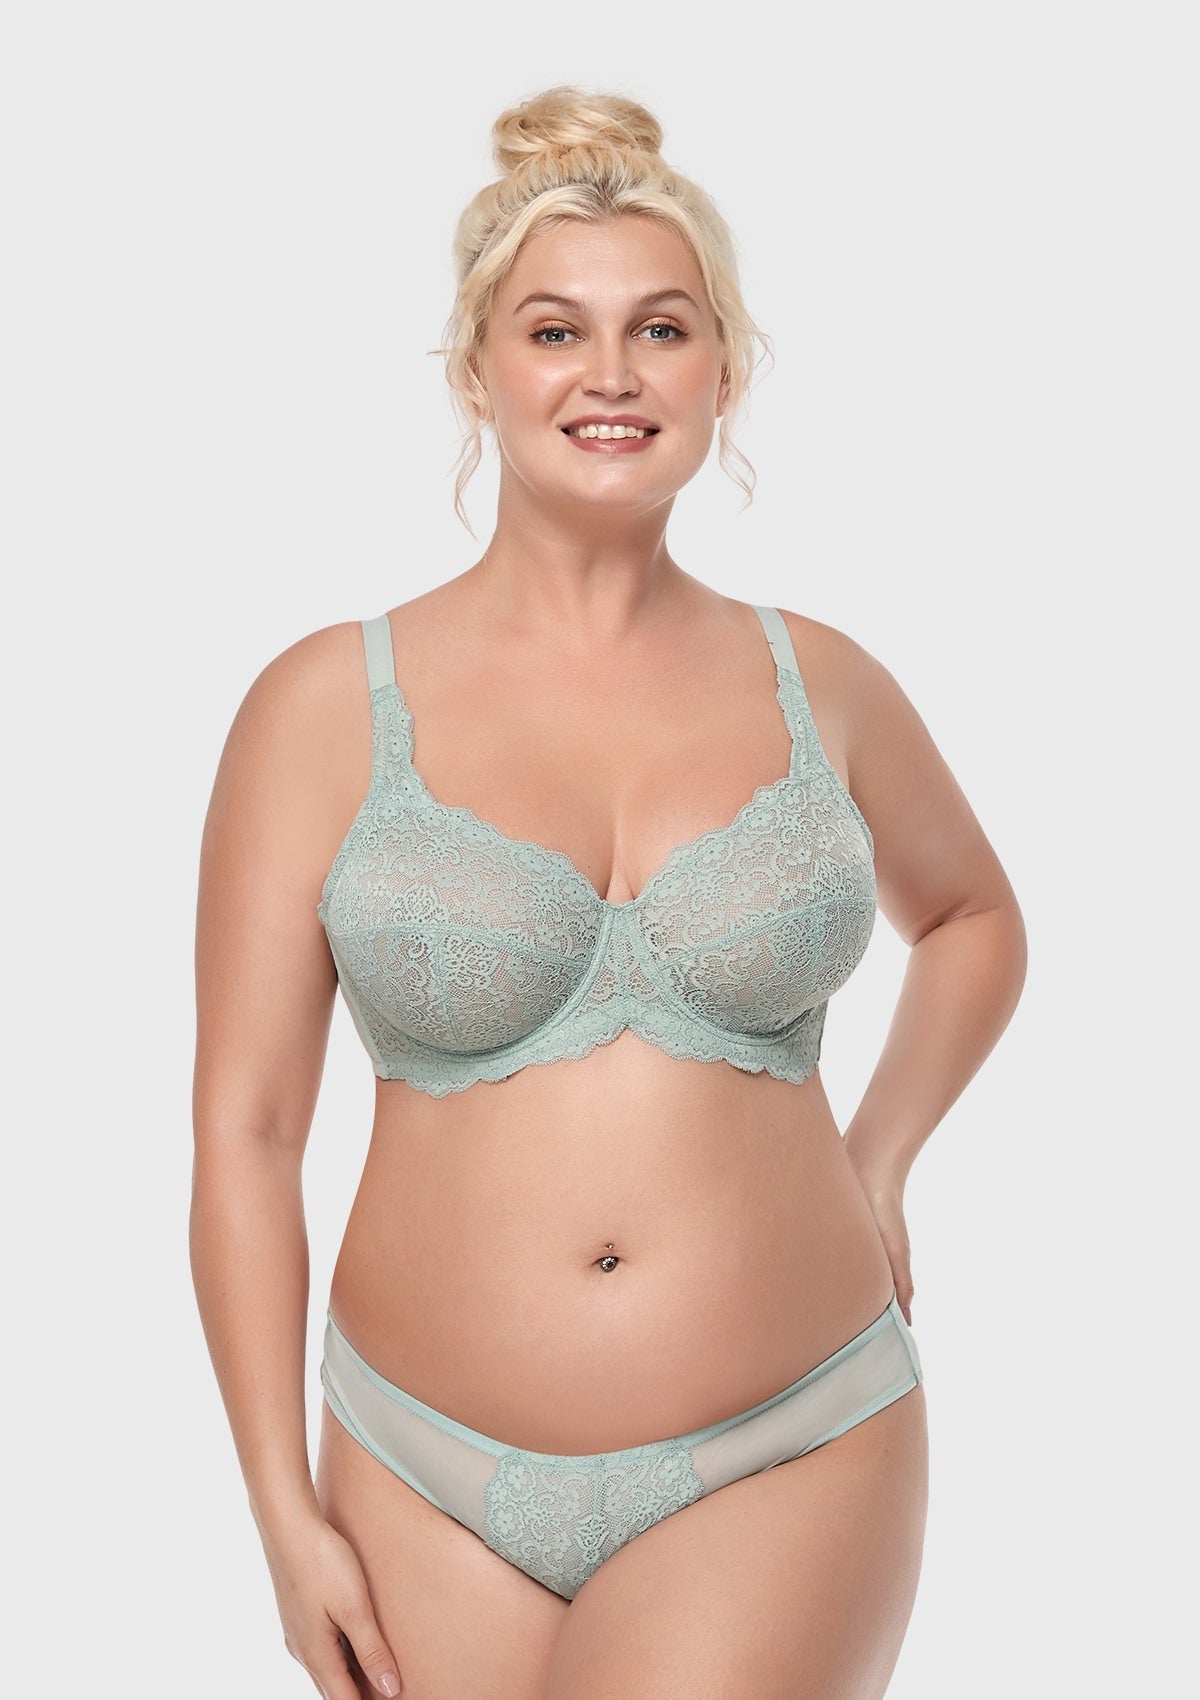 HSIA All-Over Floral Lace: Best Bra For Elderly With Sagging Breasts - Crystal Blue / 44 / DD/E